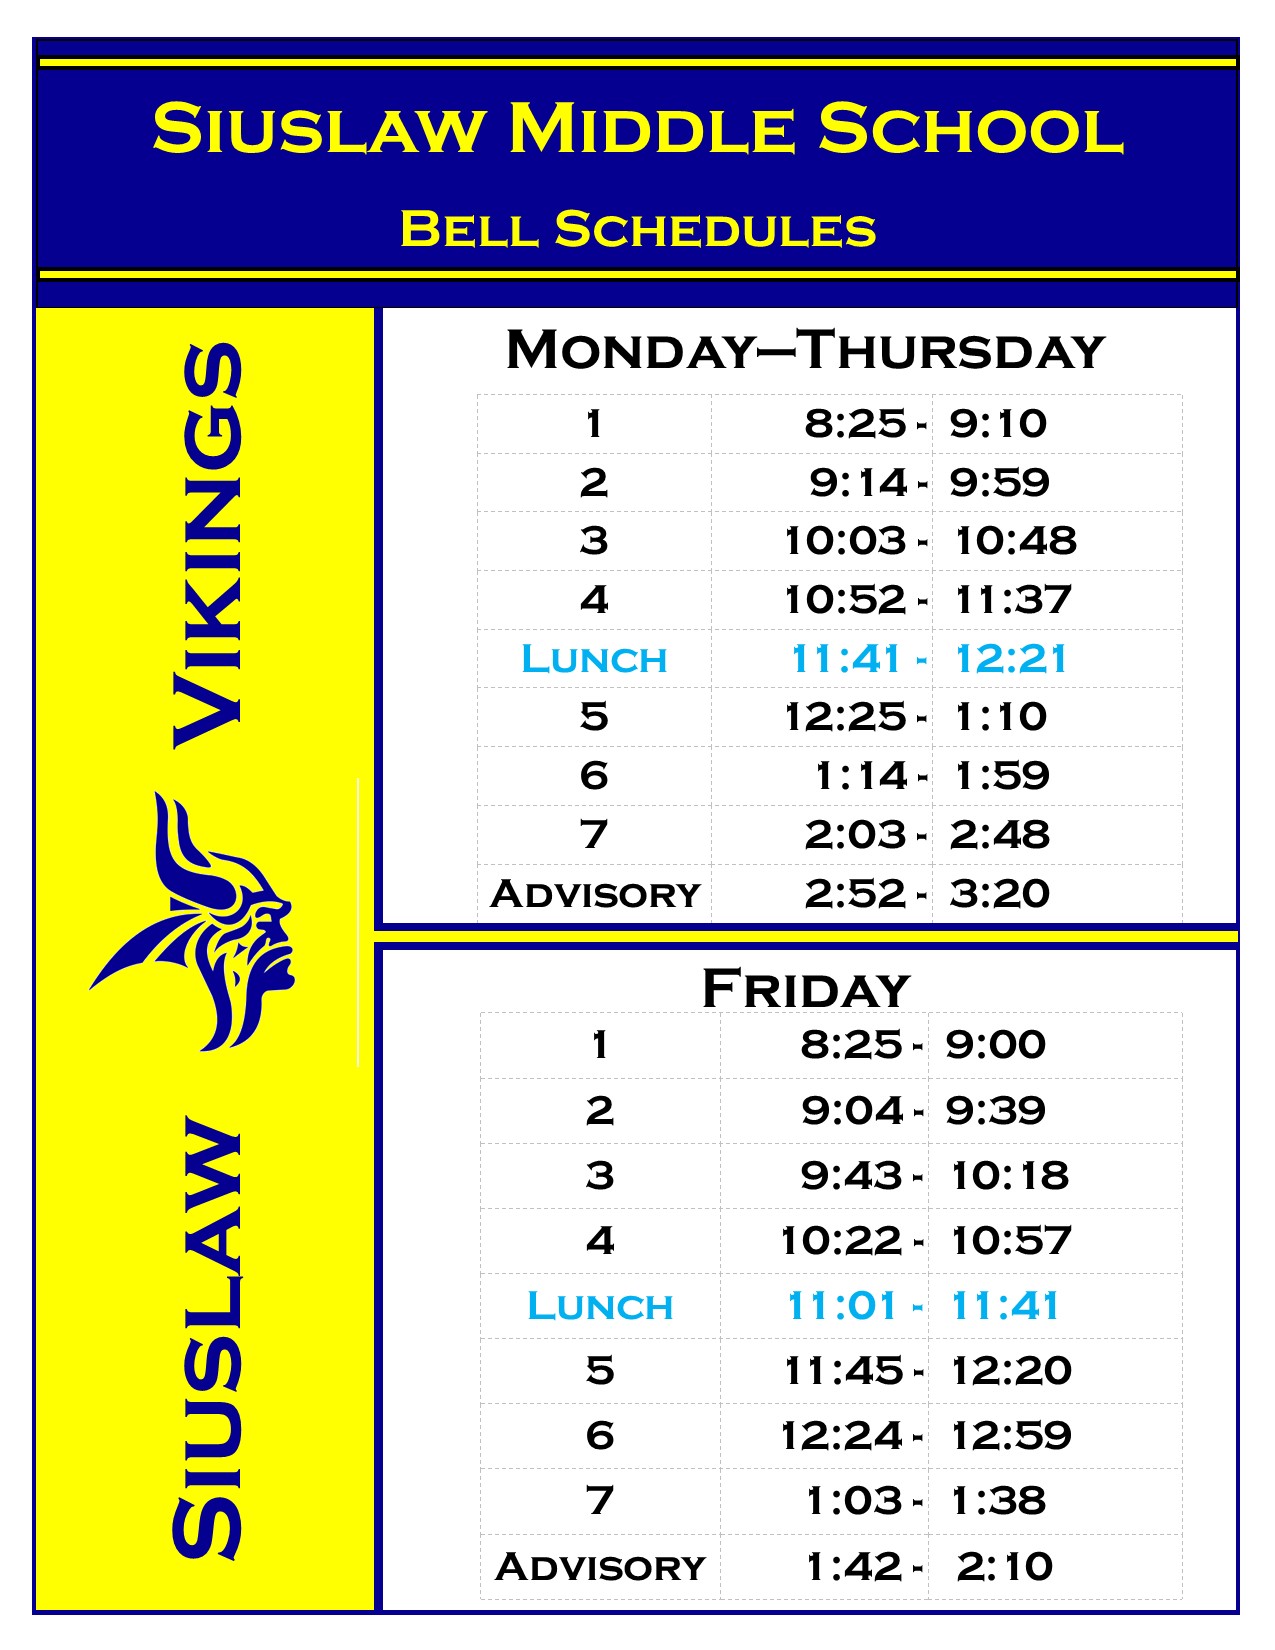 2022-23 Bell Schedules, Monday - Friday